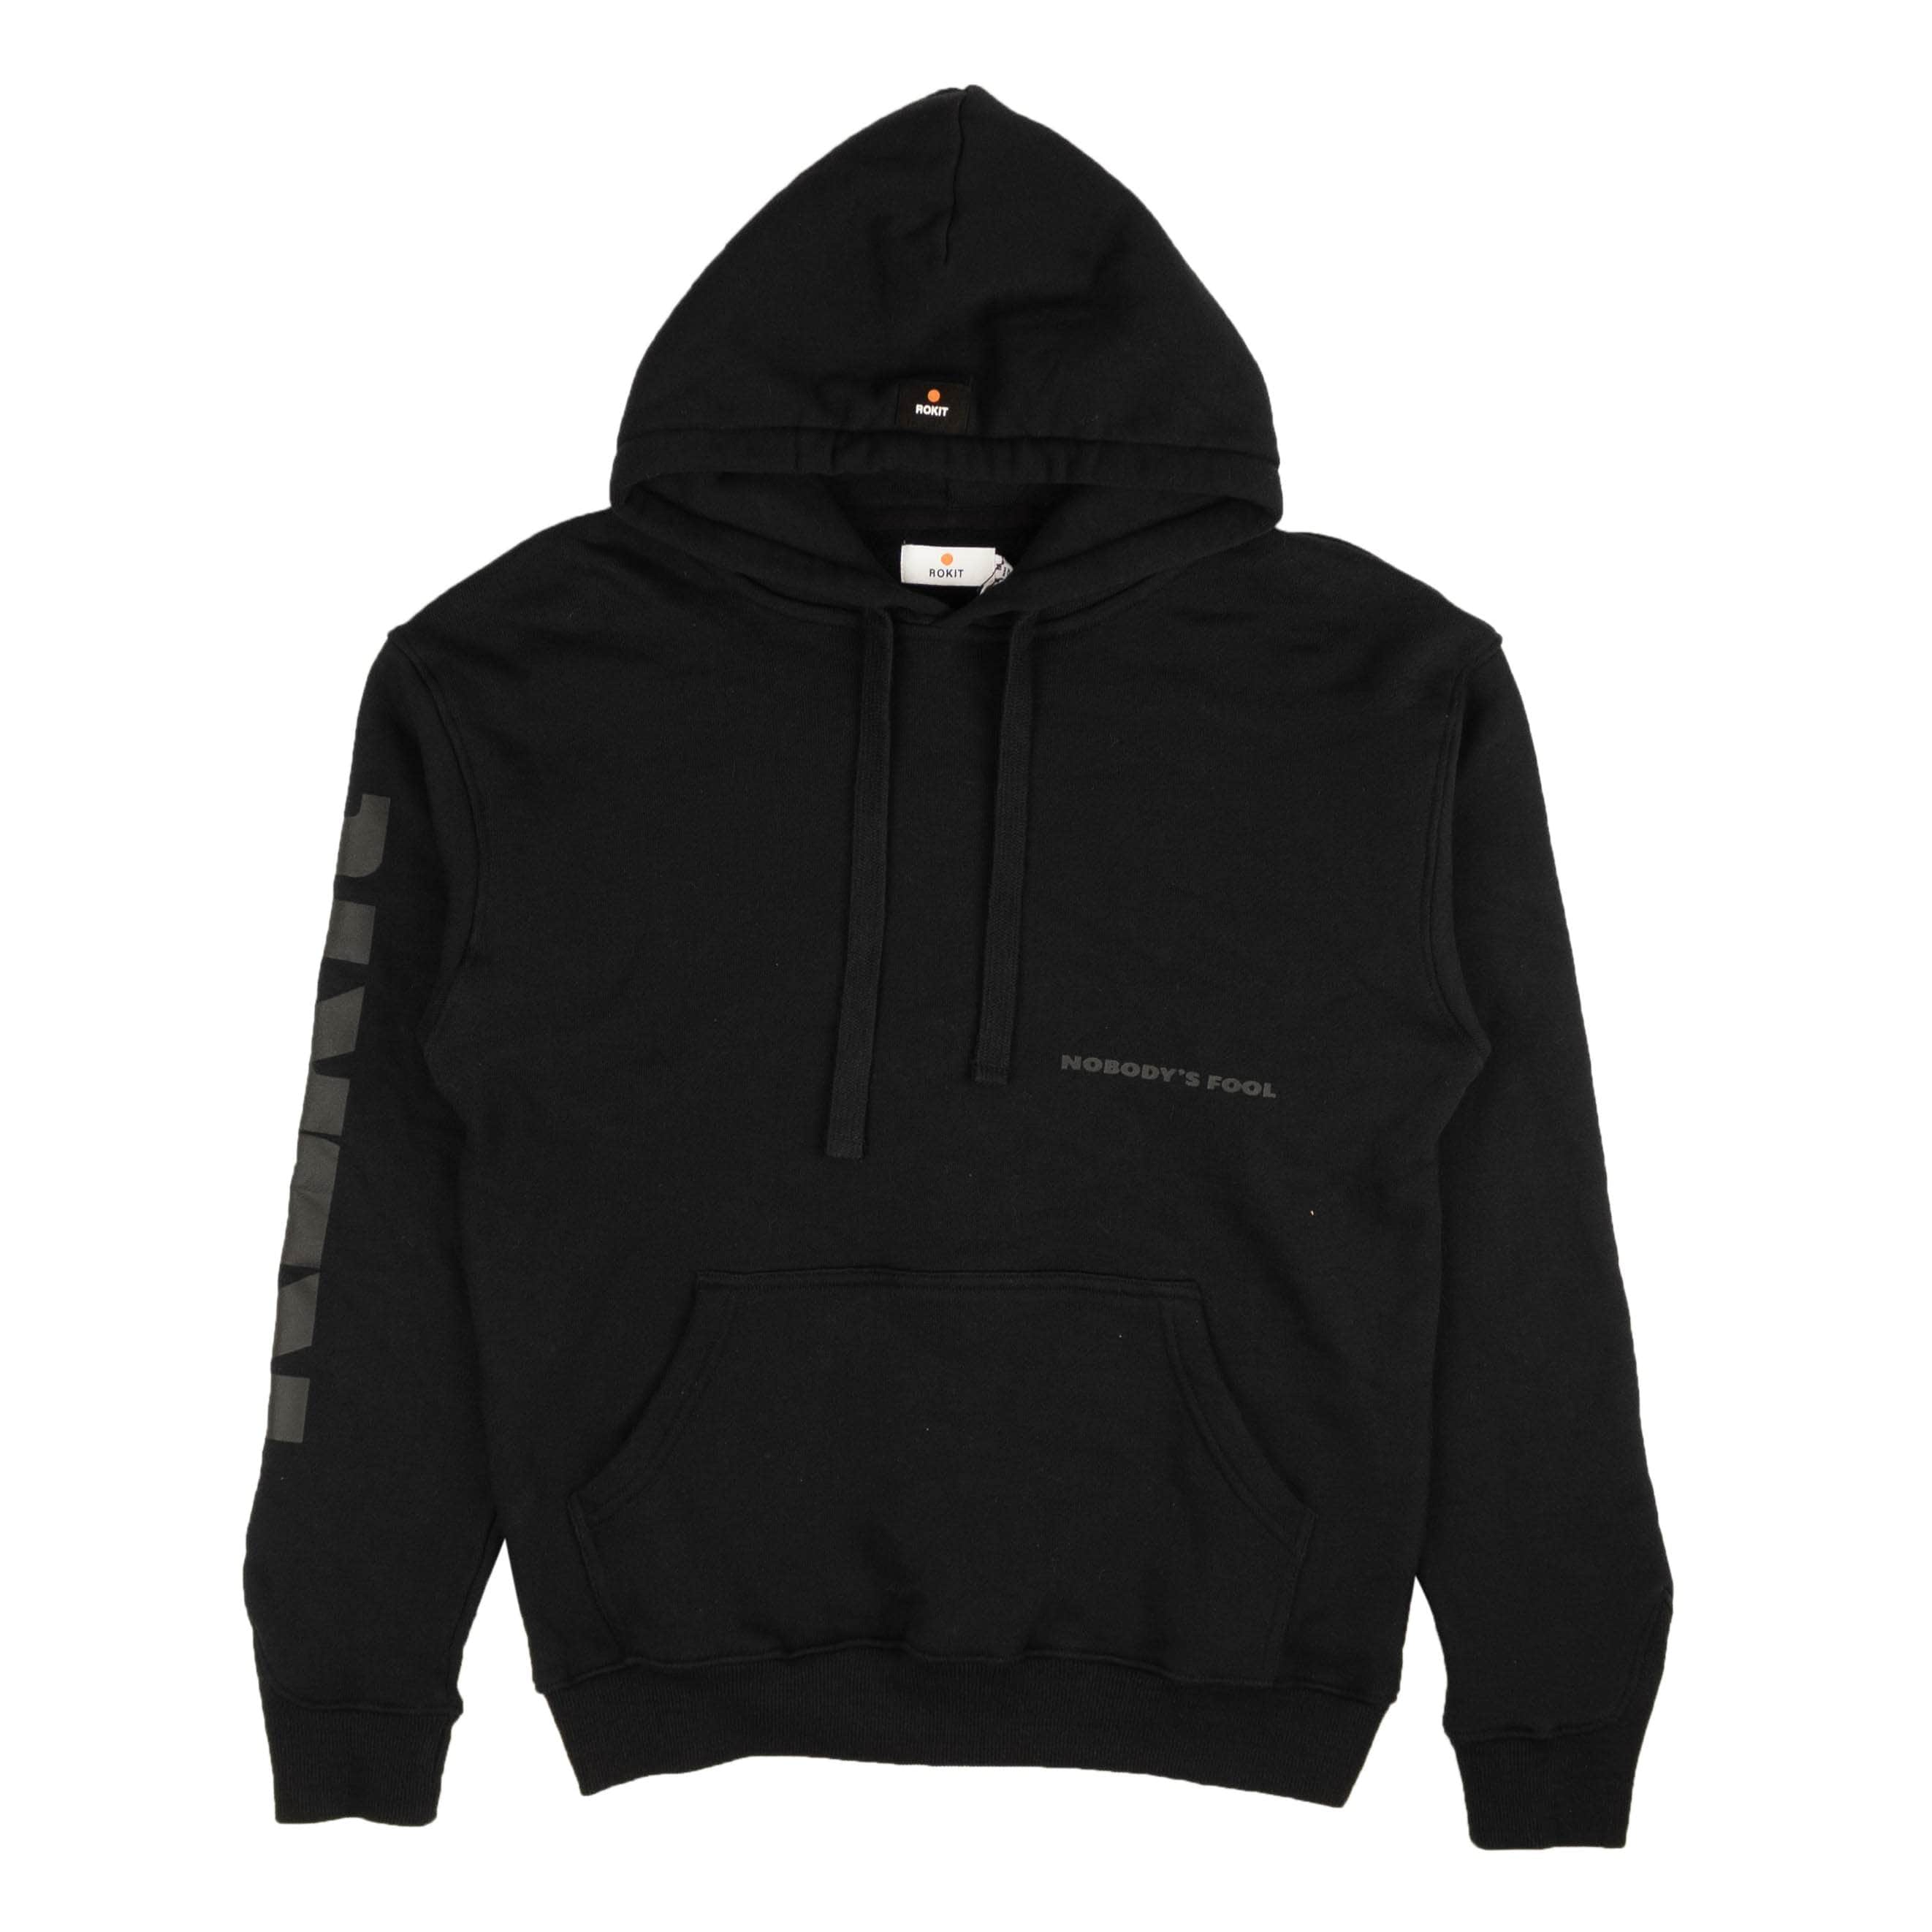 Rokit channelenable-all, chicmi, couponcollection, gender-mens, main-clothing, mens-shoes, MixedApparel, rokit, size-m, size-s, under-250 M / 381-6501 Black The Gallery Logo Hoodie 95-RKT-1004/M 95-RKT-1004/M